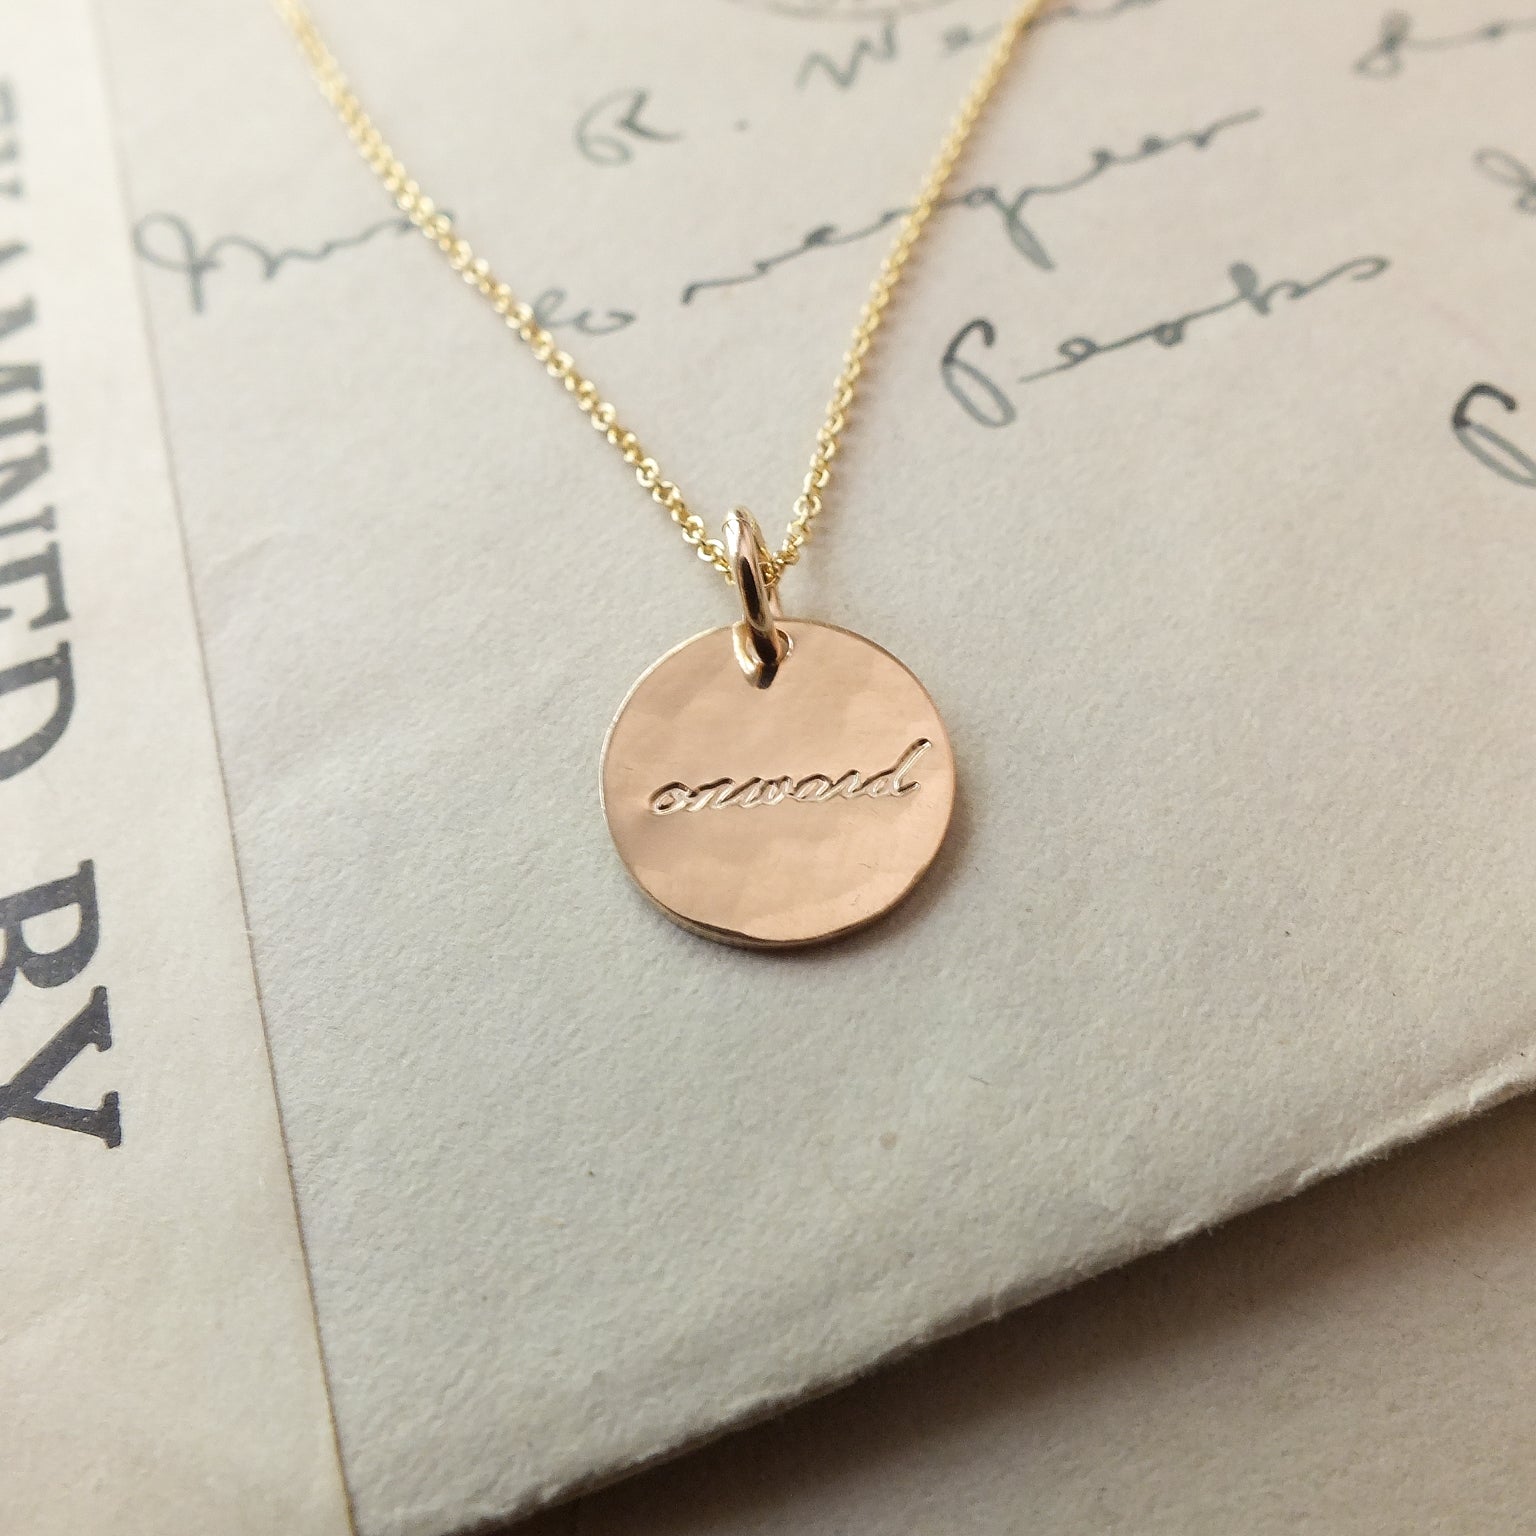 A Becoming Jewelry Onward Necklace with the word "onward" engraved on it, displayed on a piece of paper with cursive handwriting.